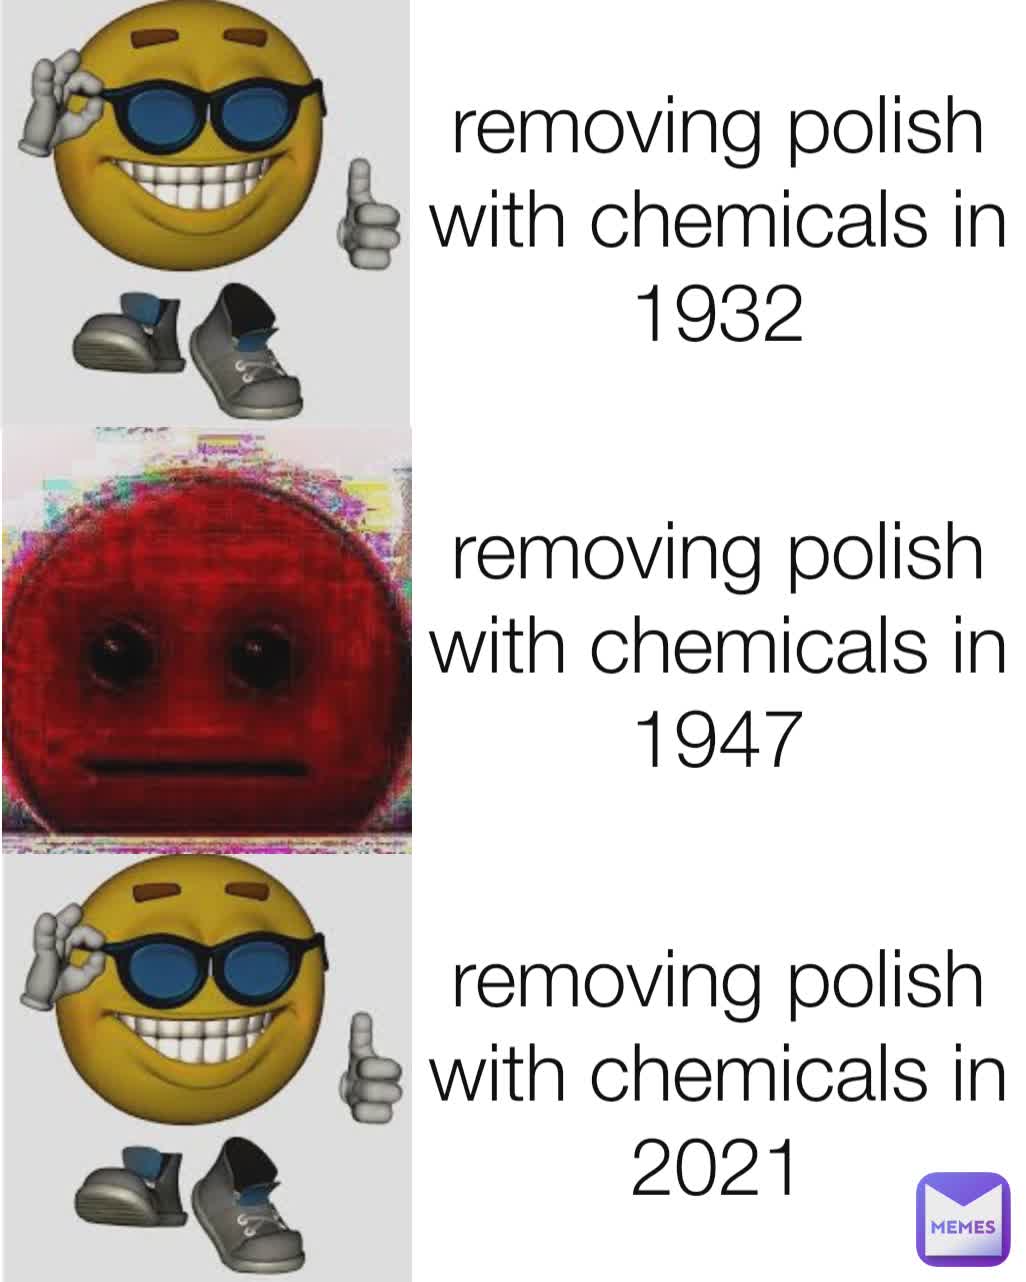 removing polish with chemicals in 1932 removing polish with chemicals in 1947 removing polish with chemicals in 2021